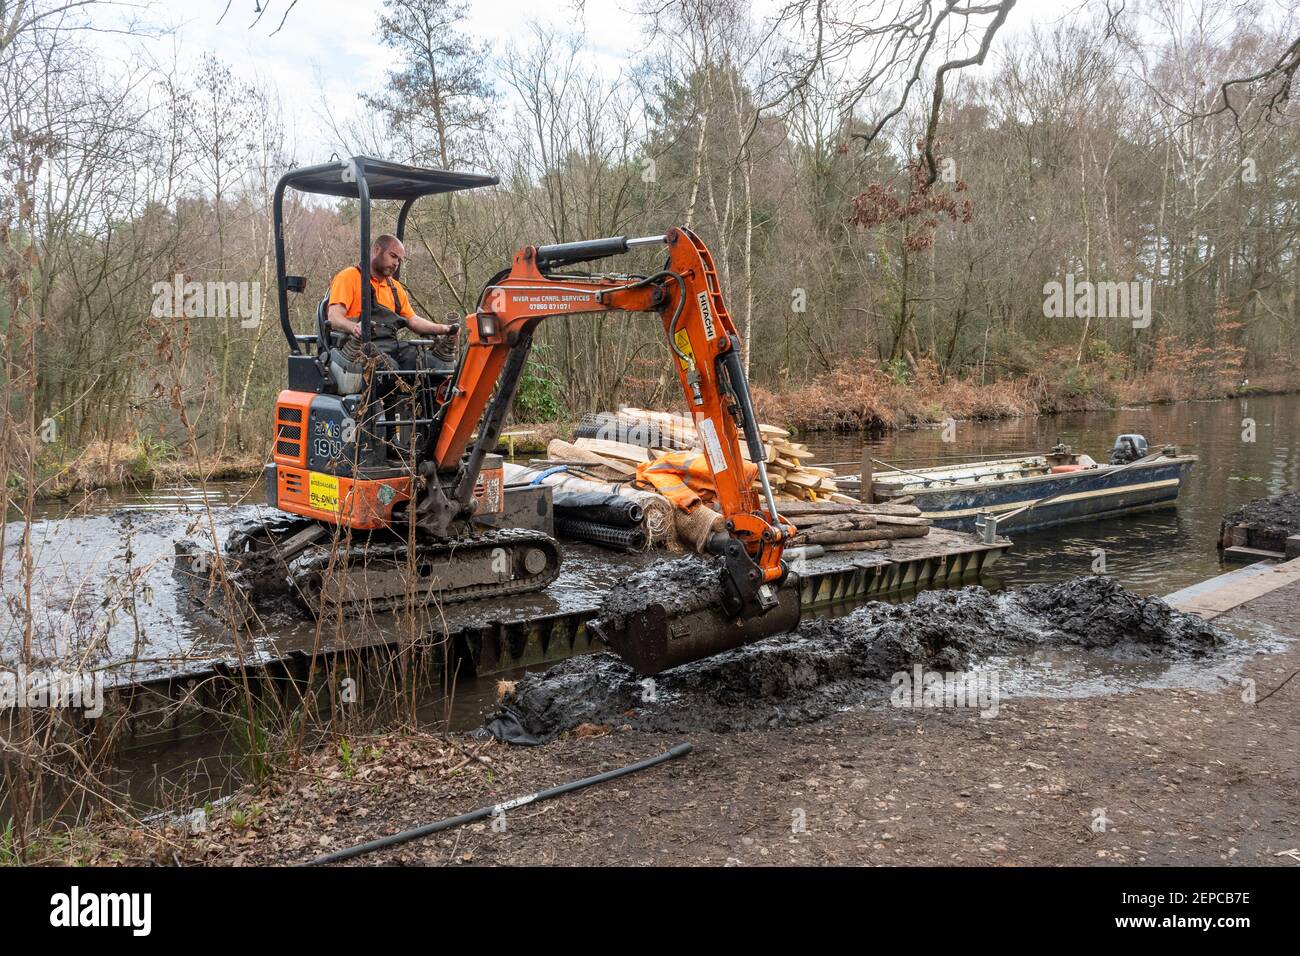 Man working in an excavator or digger on a floating work pontoon repairing an eroded canal bank on Basingstoke Canal in Surrey, UK Stock Photo